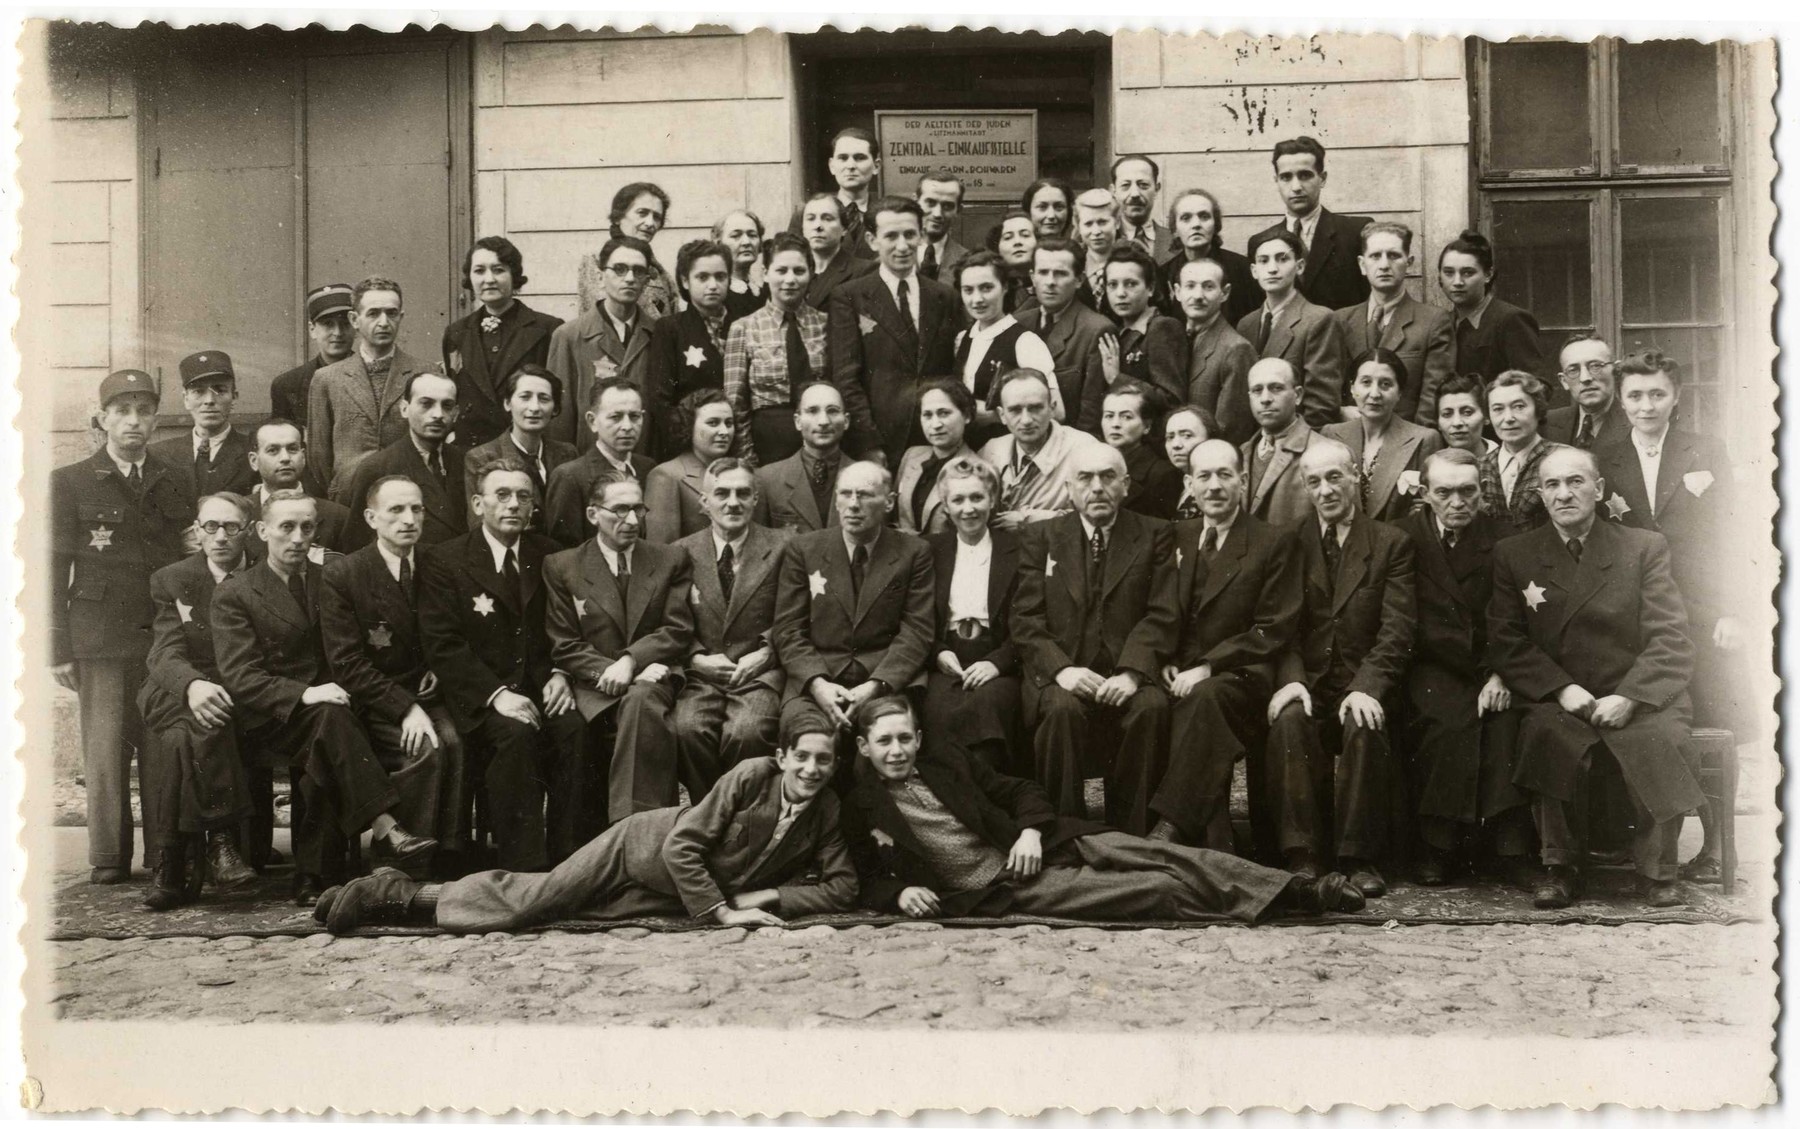 Group portrait of the employees of the Zentral Einkaufstelle, the central purchasing department of the ghetto which provided raw materials to the other ghetto workshops.

Pictured in the front row, sixth from the left is Gustaw Gerson, the director of the Einkaufstelle.  To his immediate right and in the center of the photograph is Dawid Warszawski, head of the textile workshops.